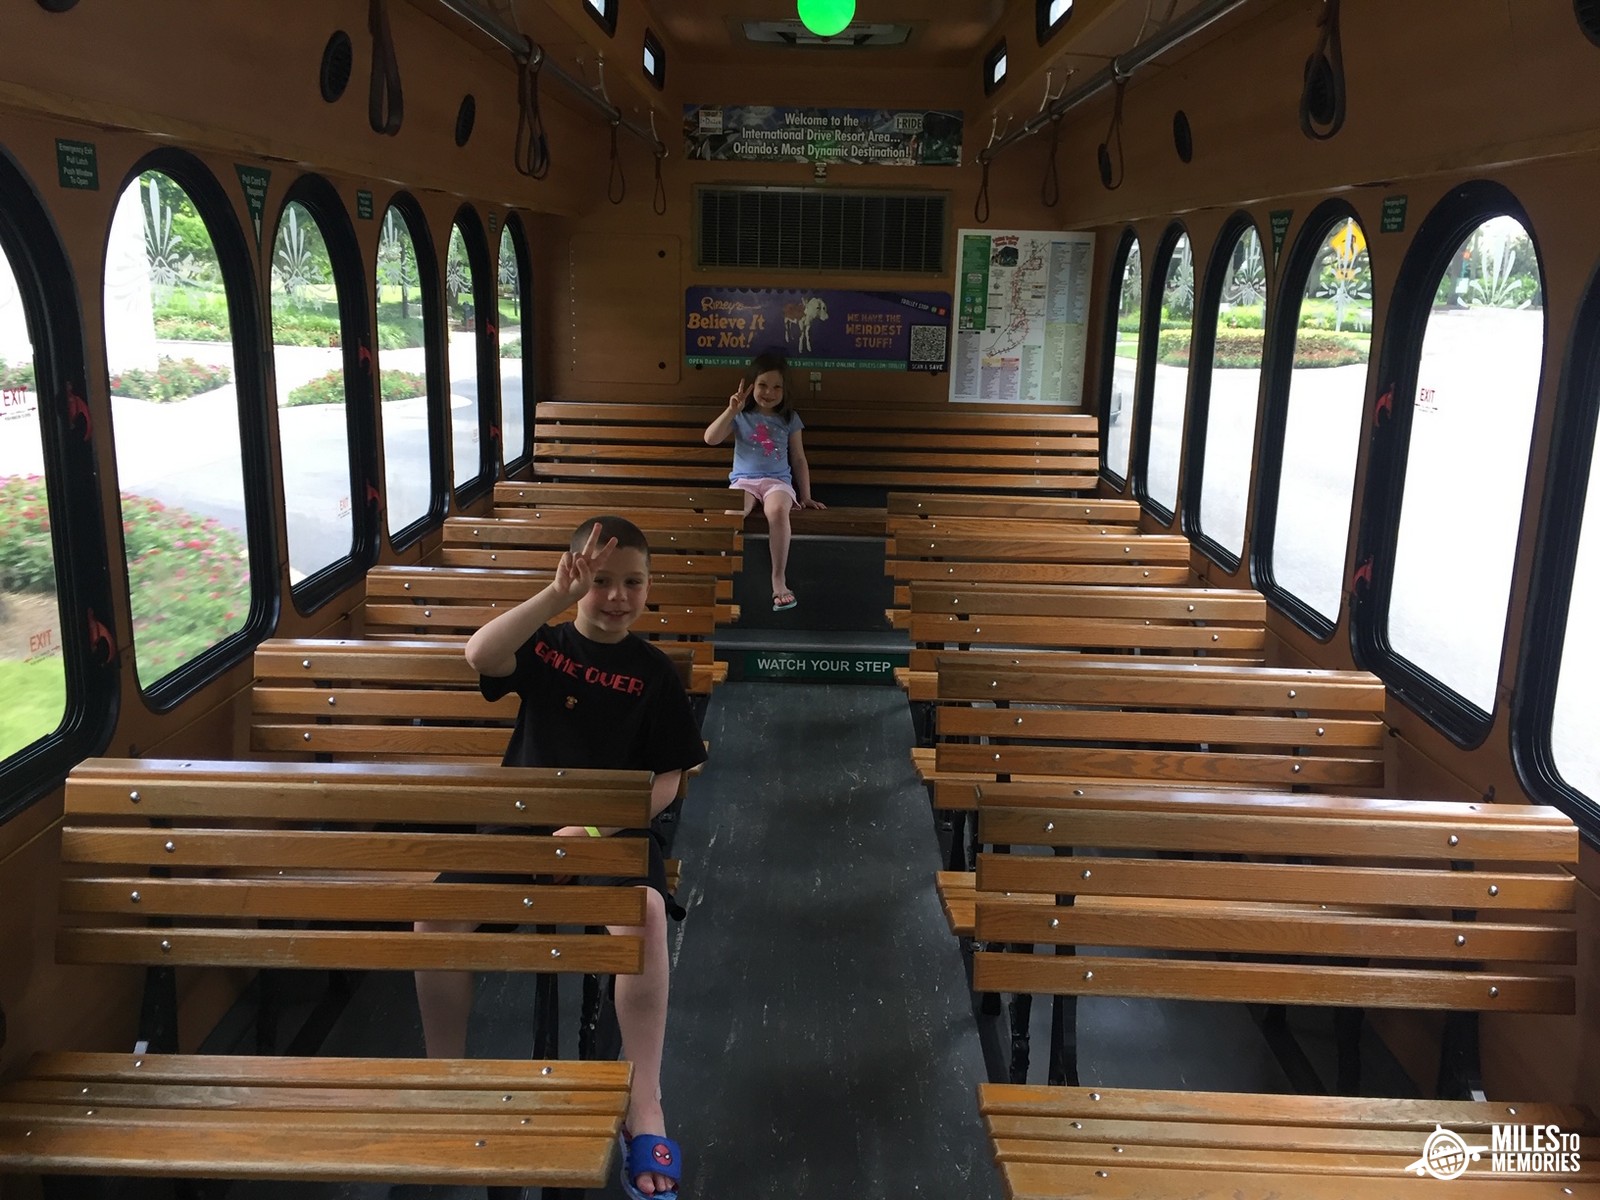 My Solo Parenting Trip Report bus